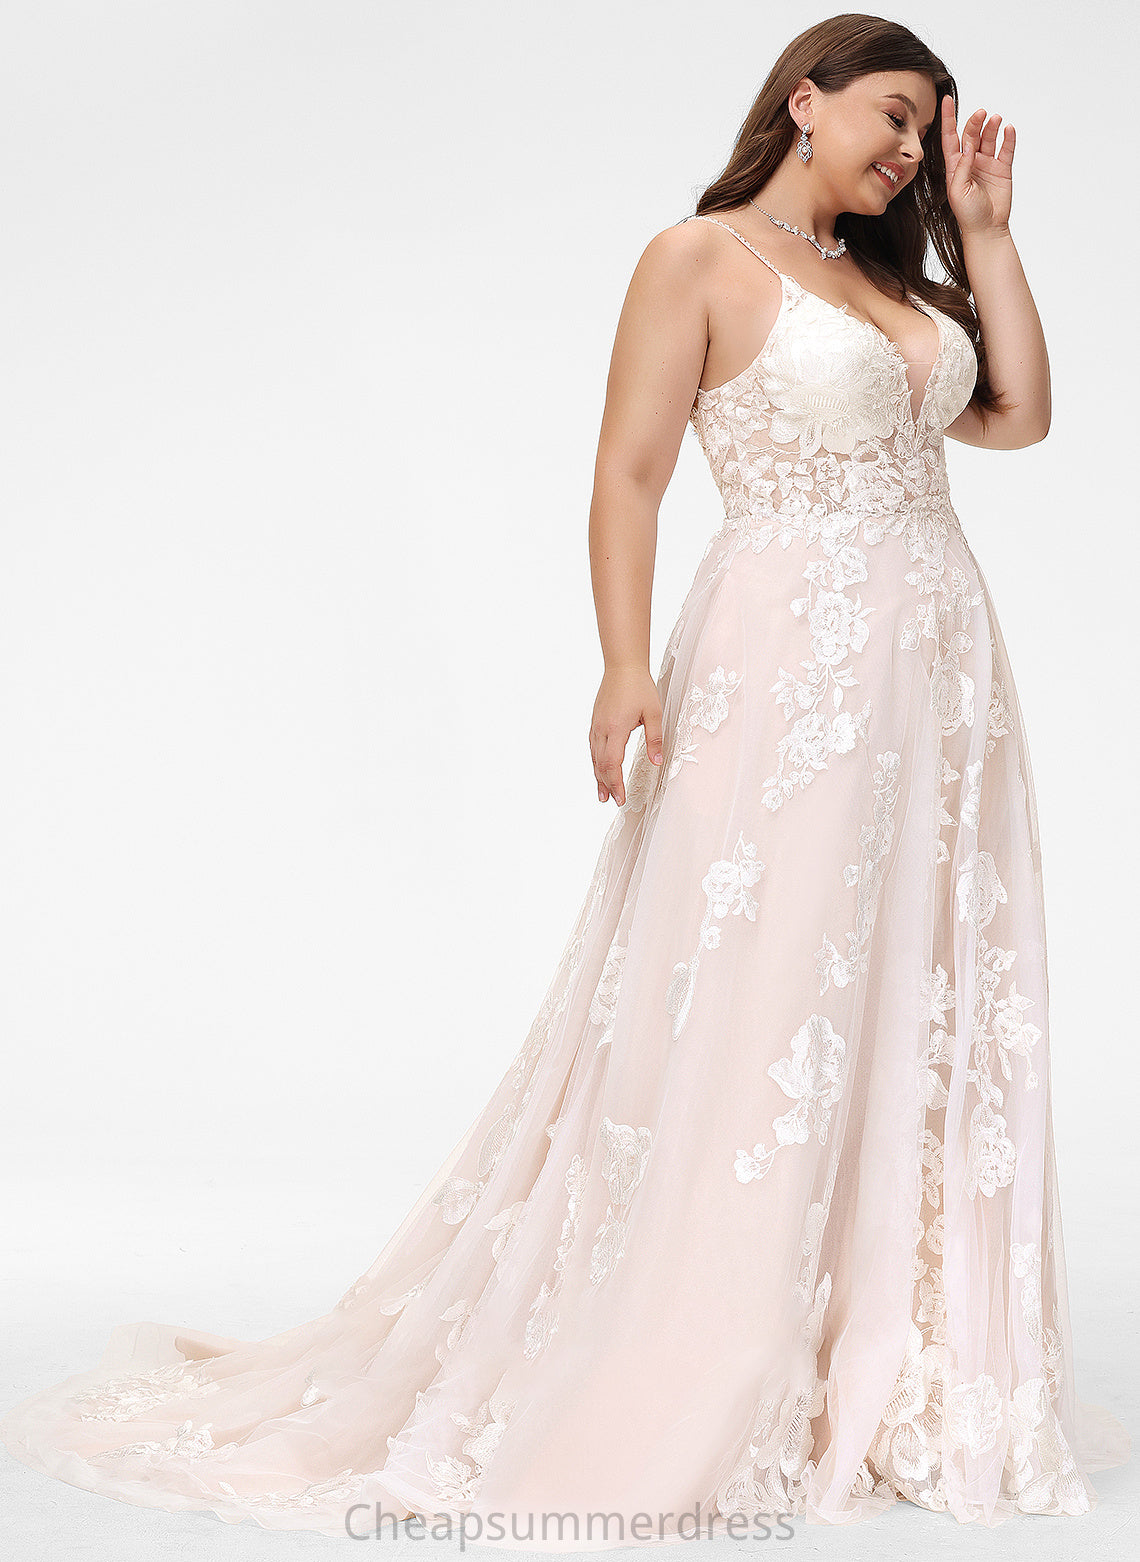 Anya V-neck Lace Dress Pockets Ball-Gown/Princess With Court Wedding Wedding Dresses Tulle Beading Train